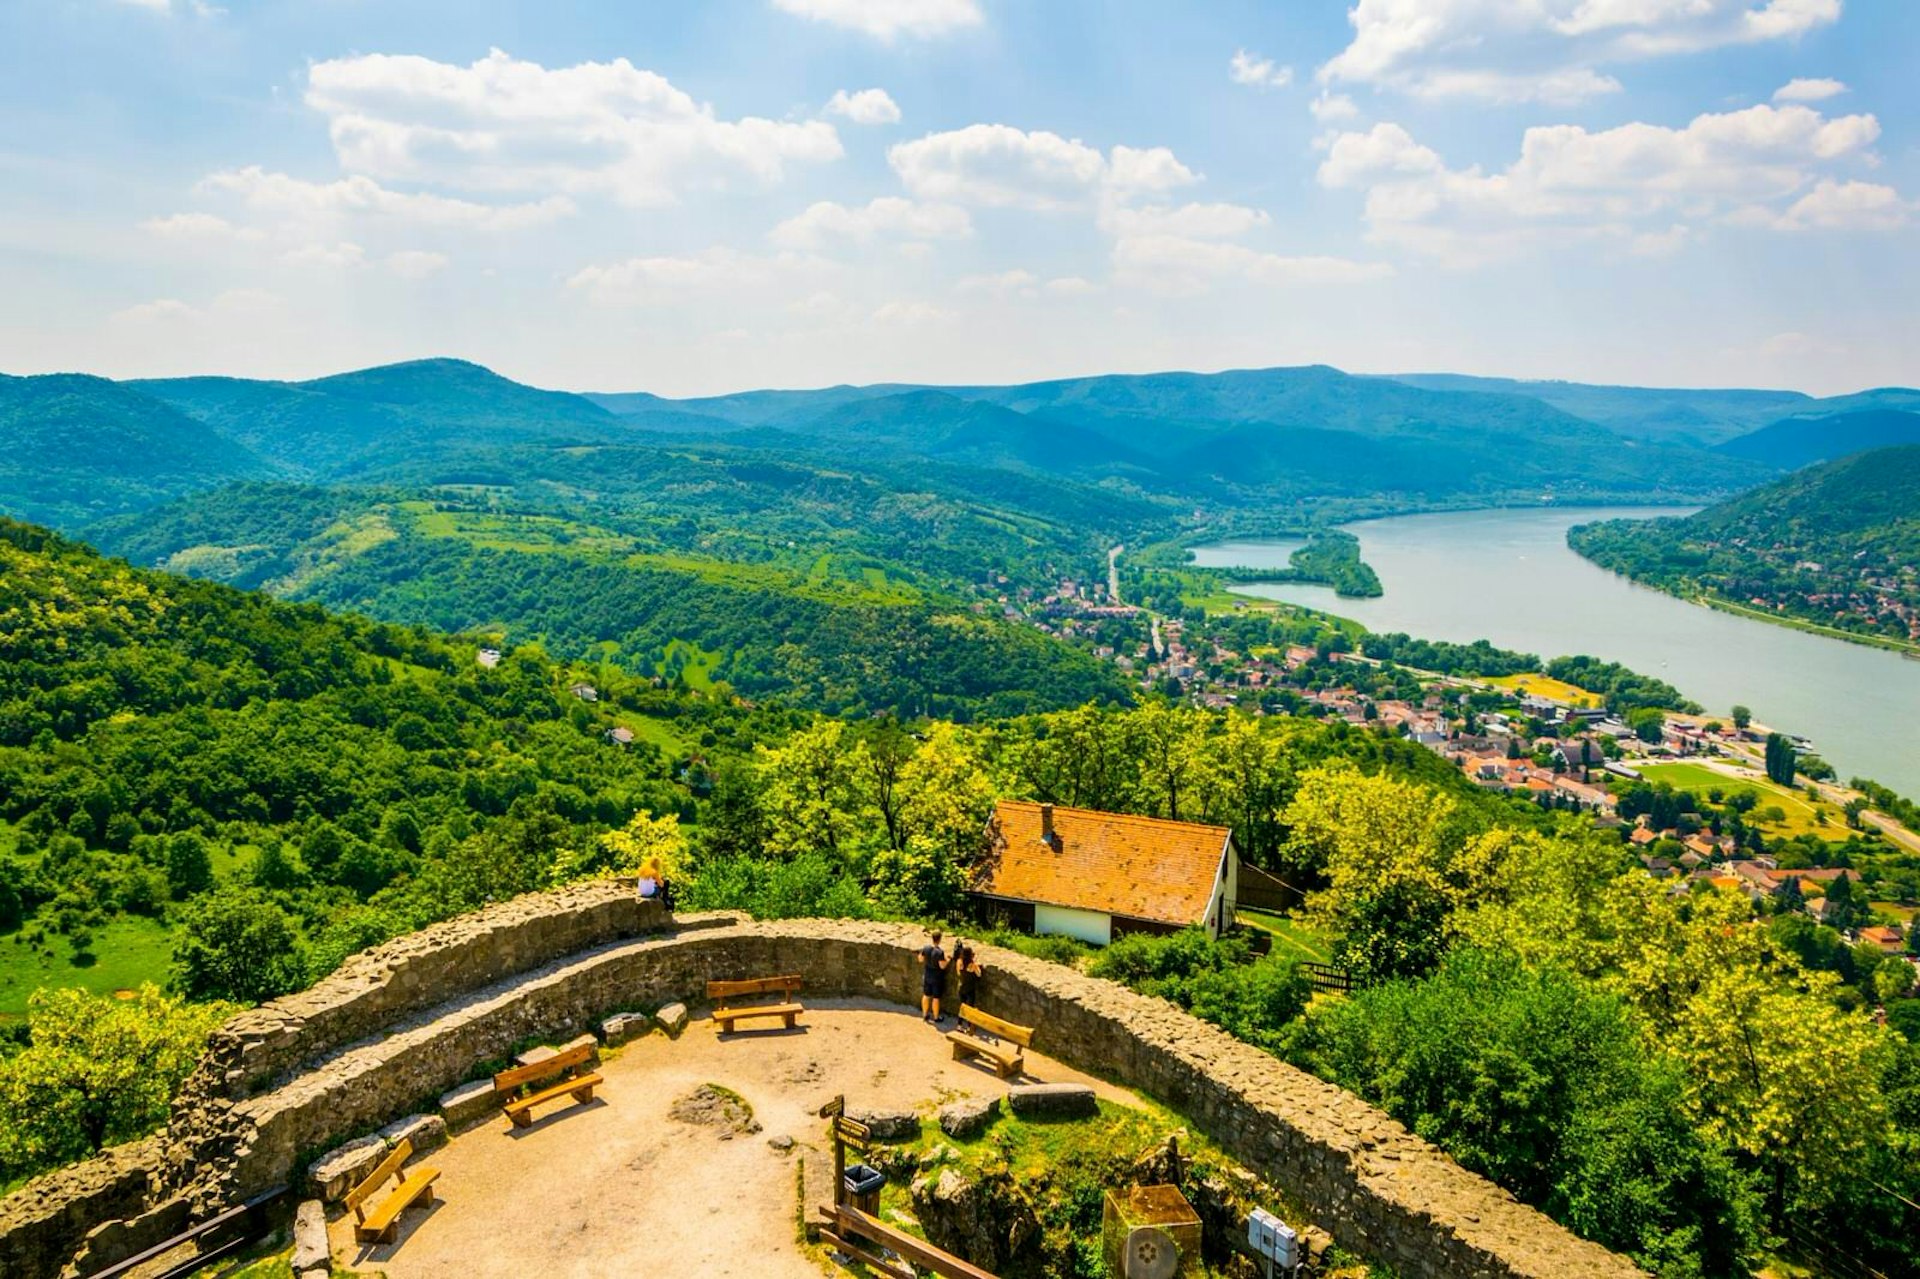 View of the Danube Bend and Börzsöny Hills from Visegrad castle